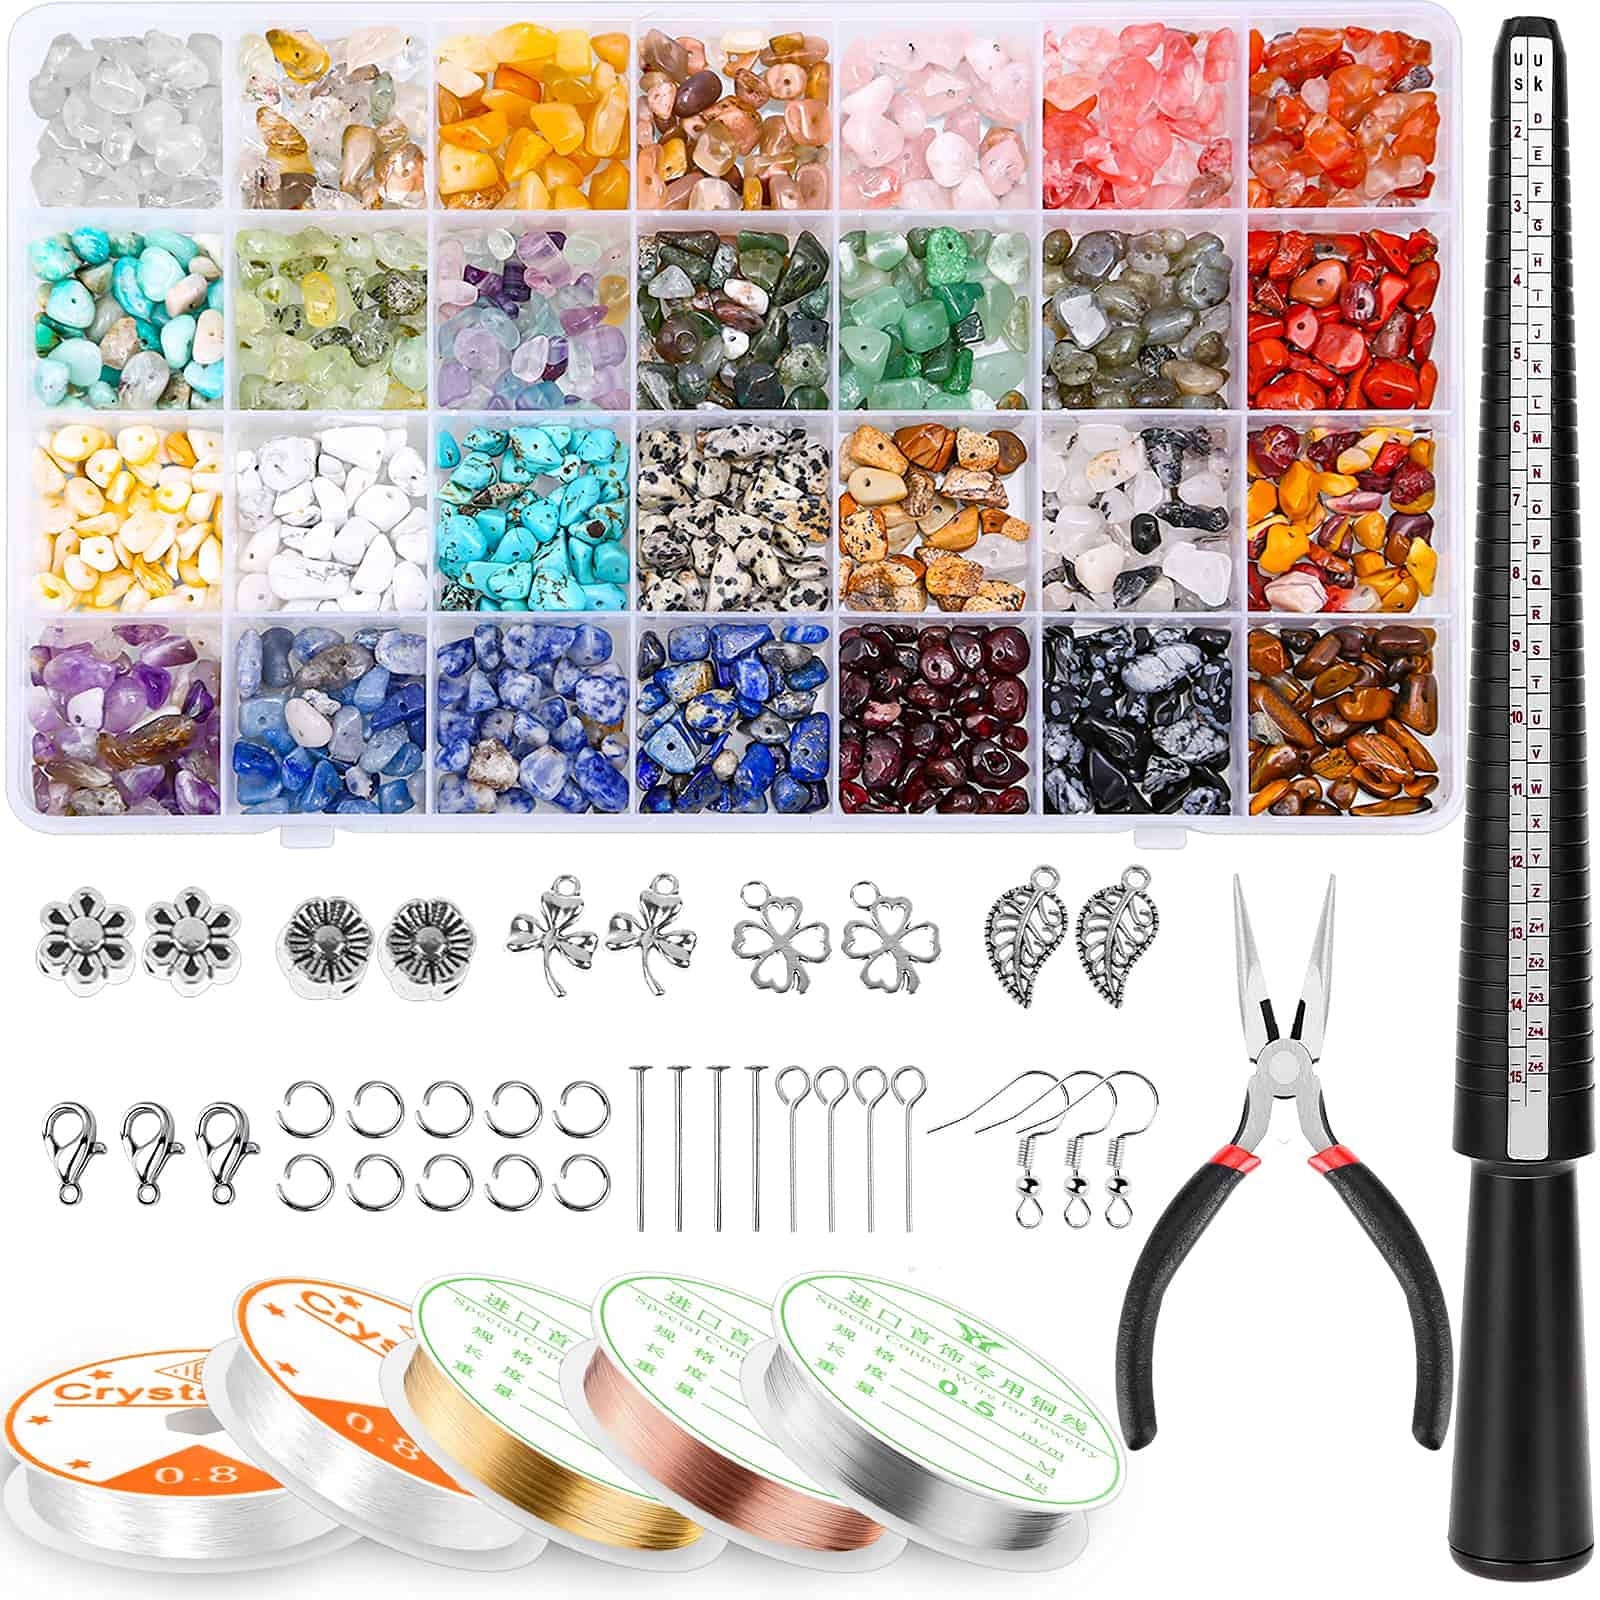 JESOT Gemstones for Jewelry Making, 1126PCS Rock Beads with Pendants,  Earring Supplies and Making Tools Kit for DIY Bracelet Necklace and Earrings